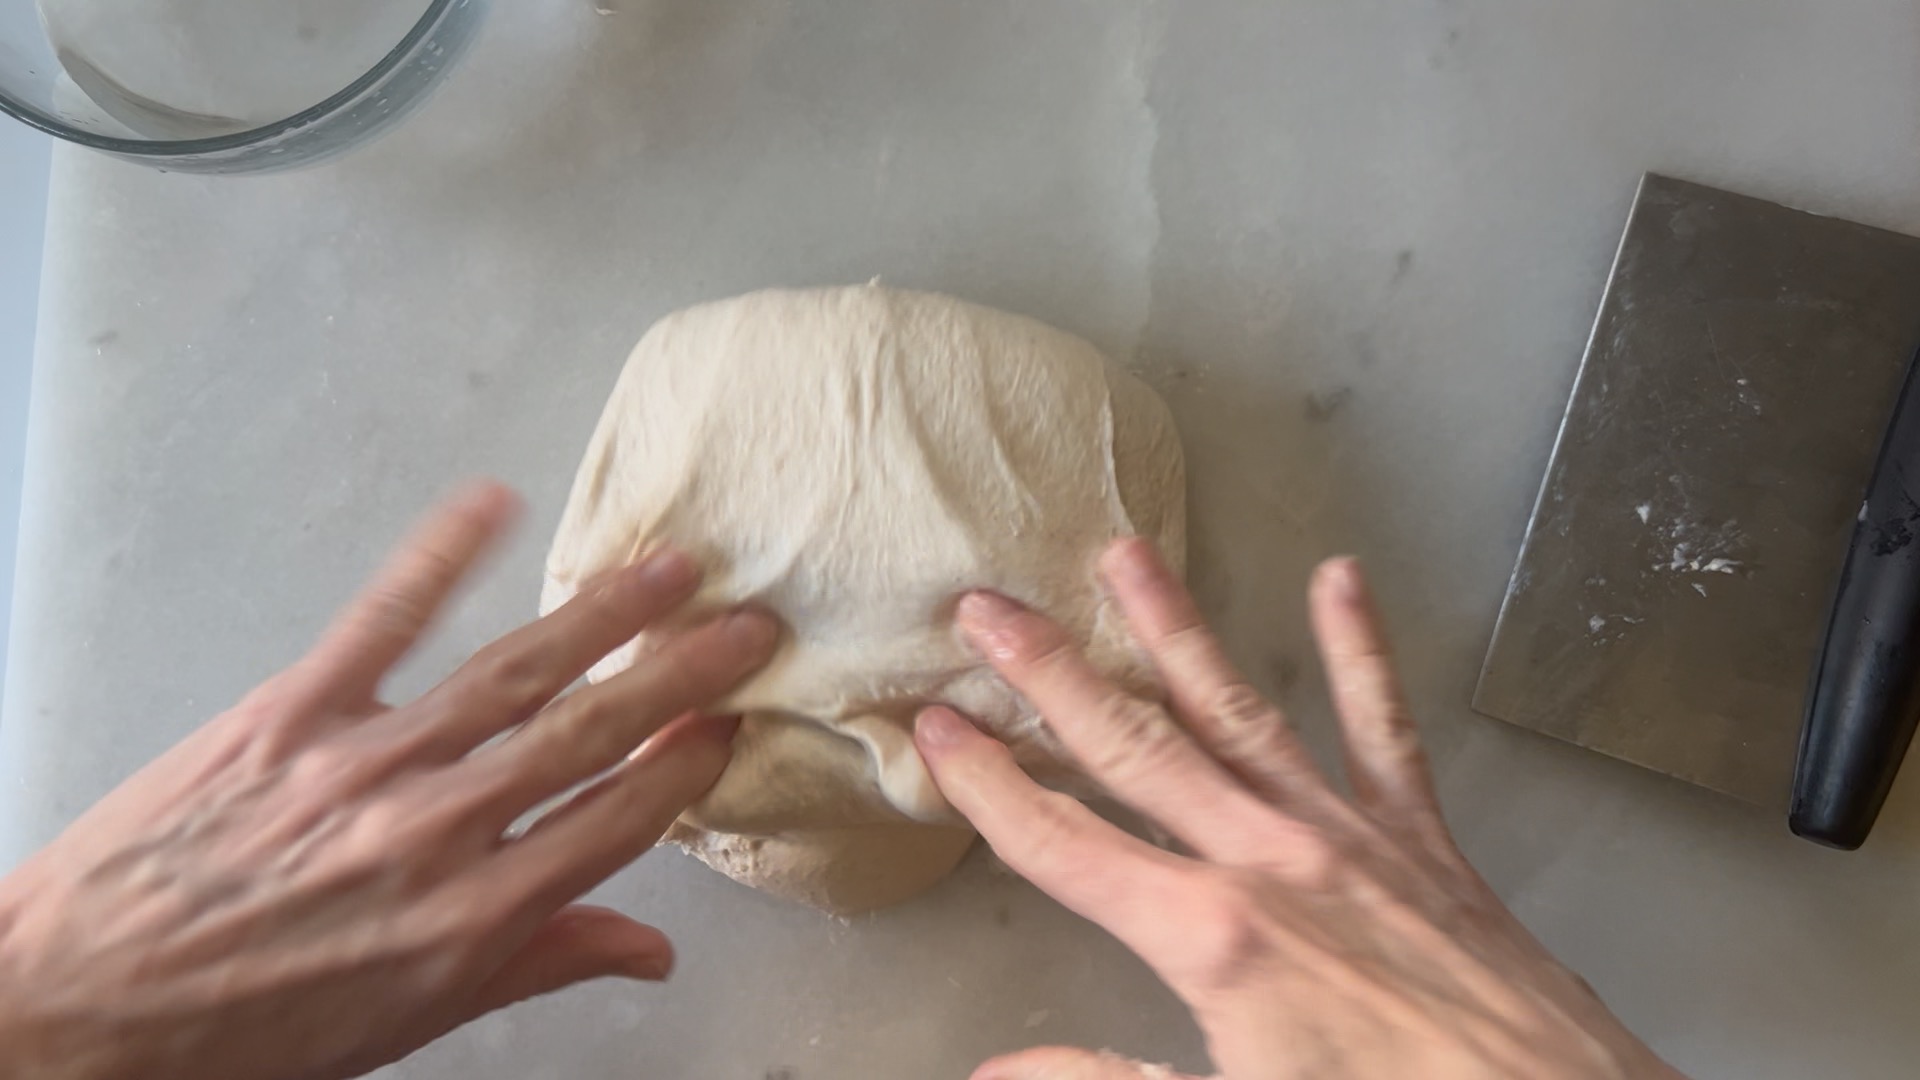 stretching and folding the dough